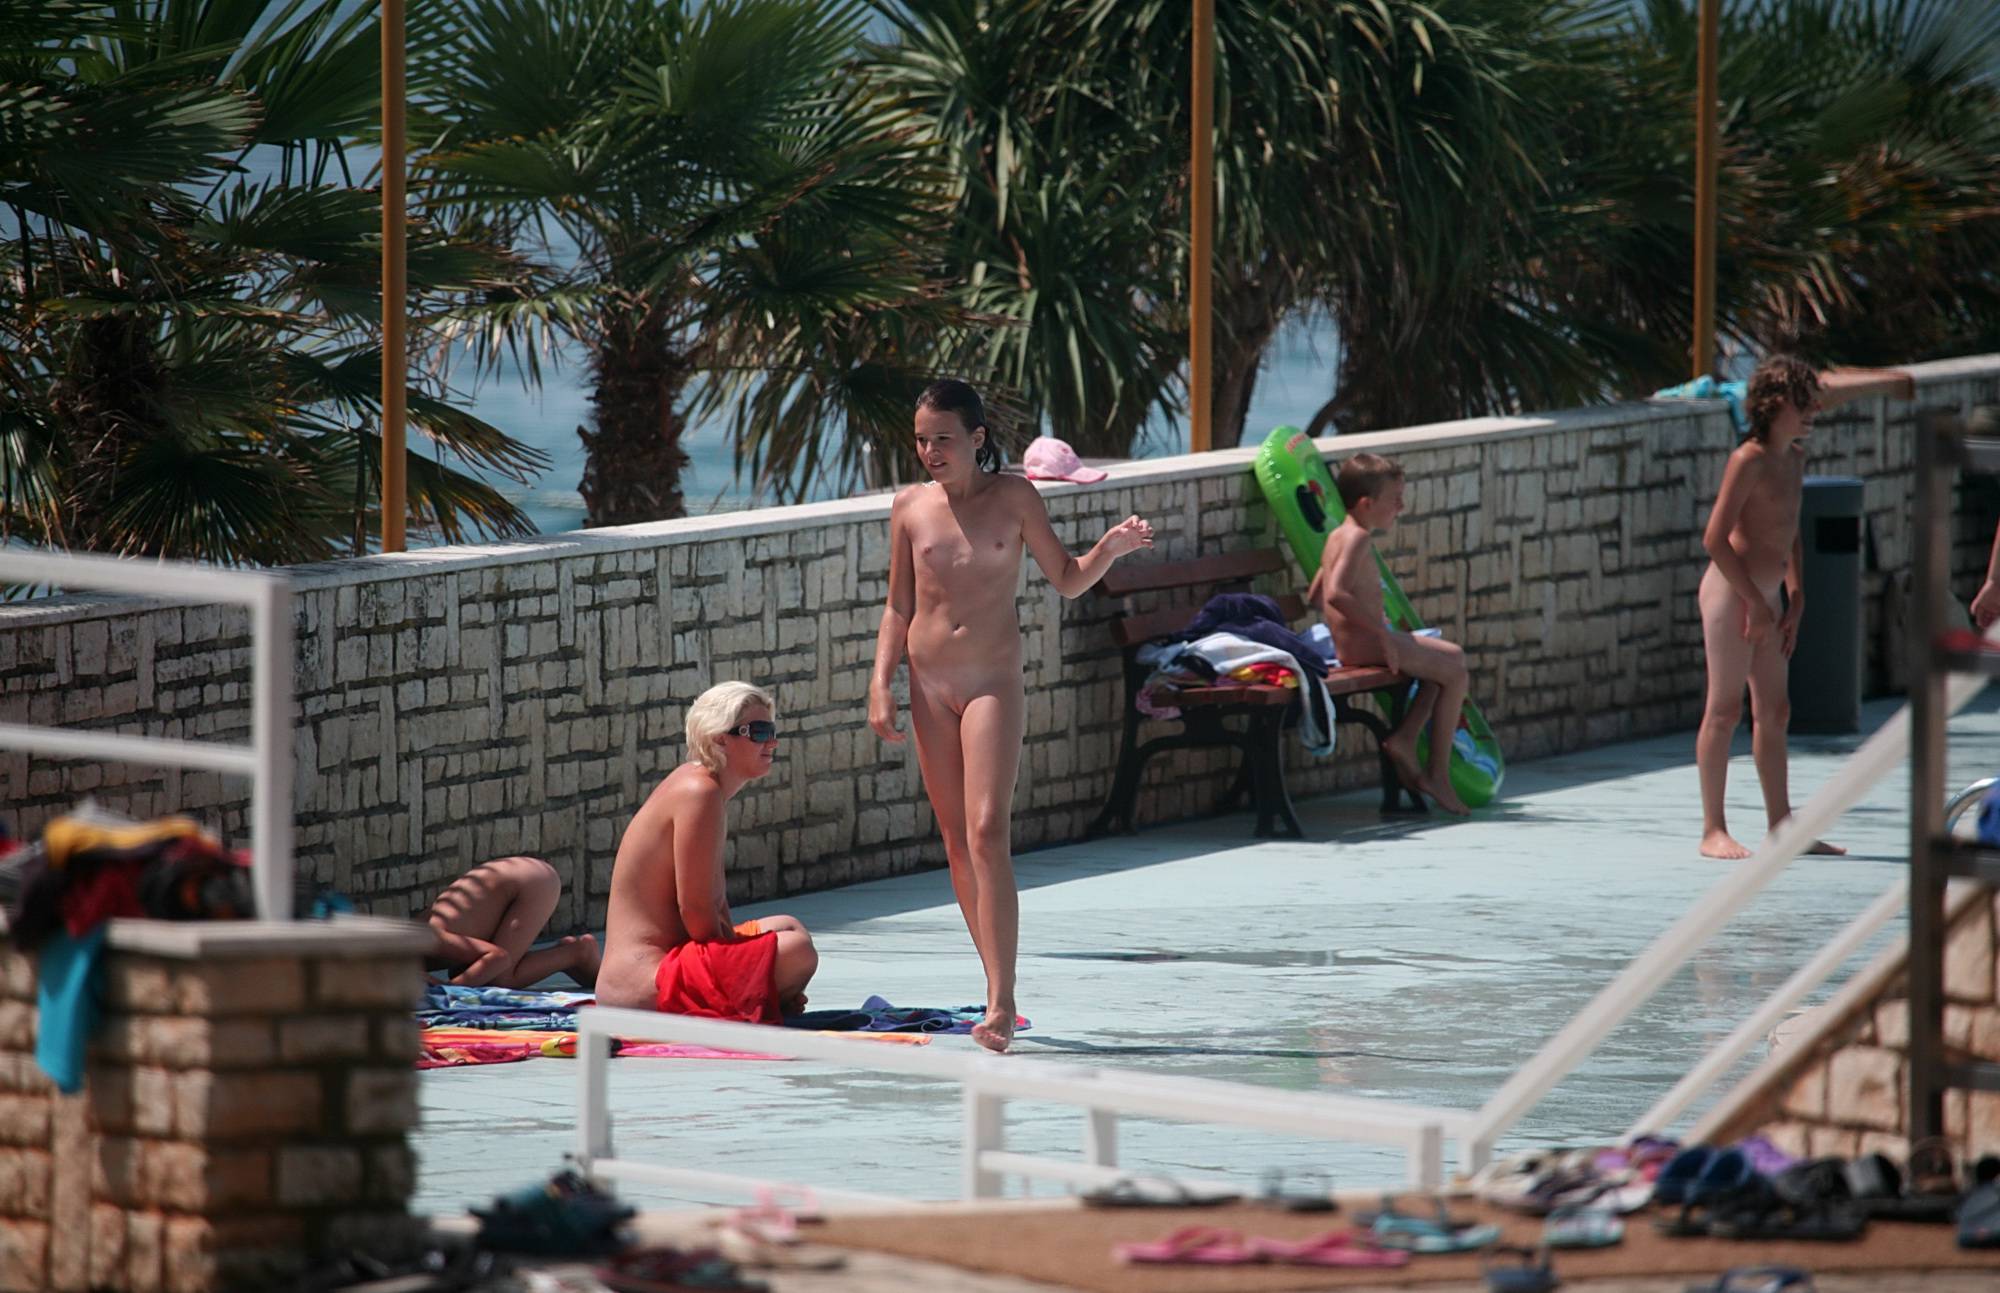 Pure Nudism Photos From the Pool to Walkway - 1